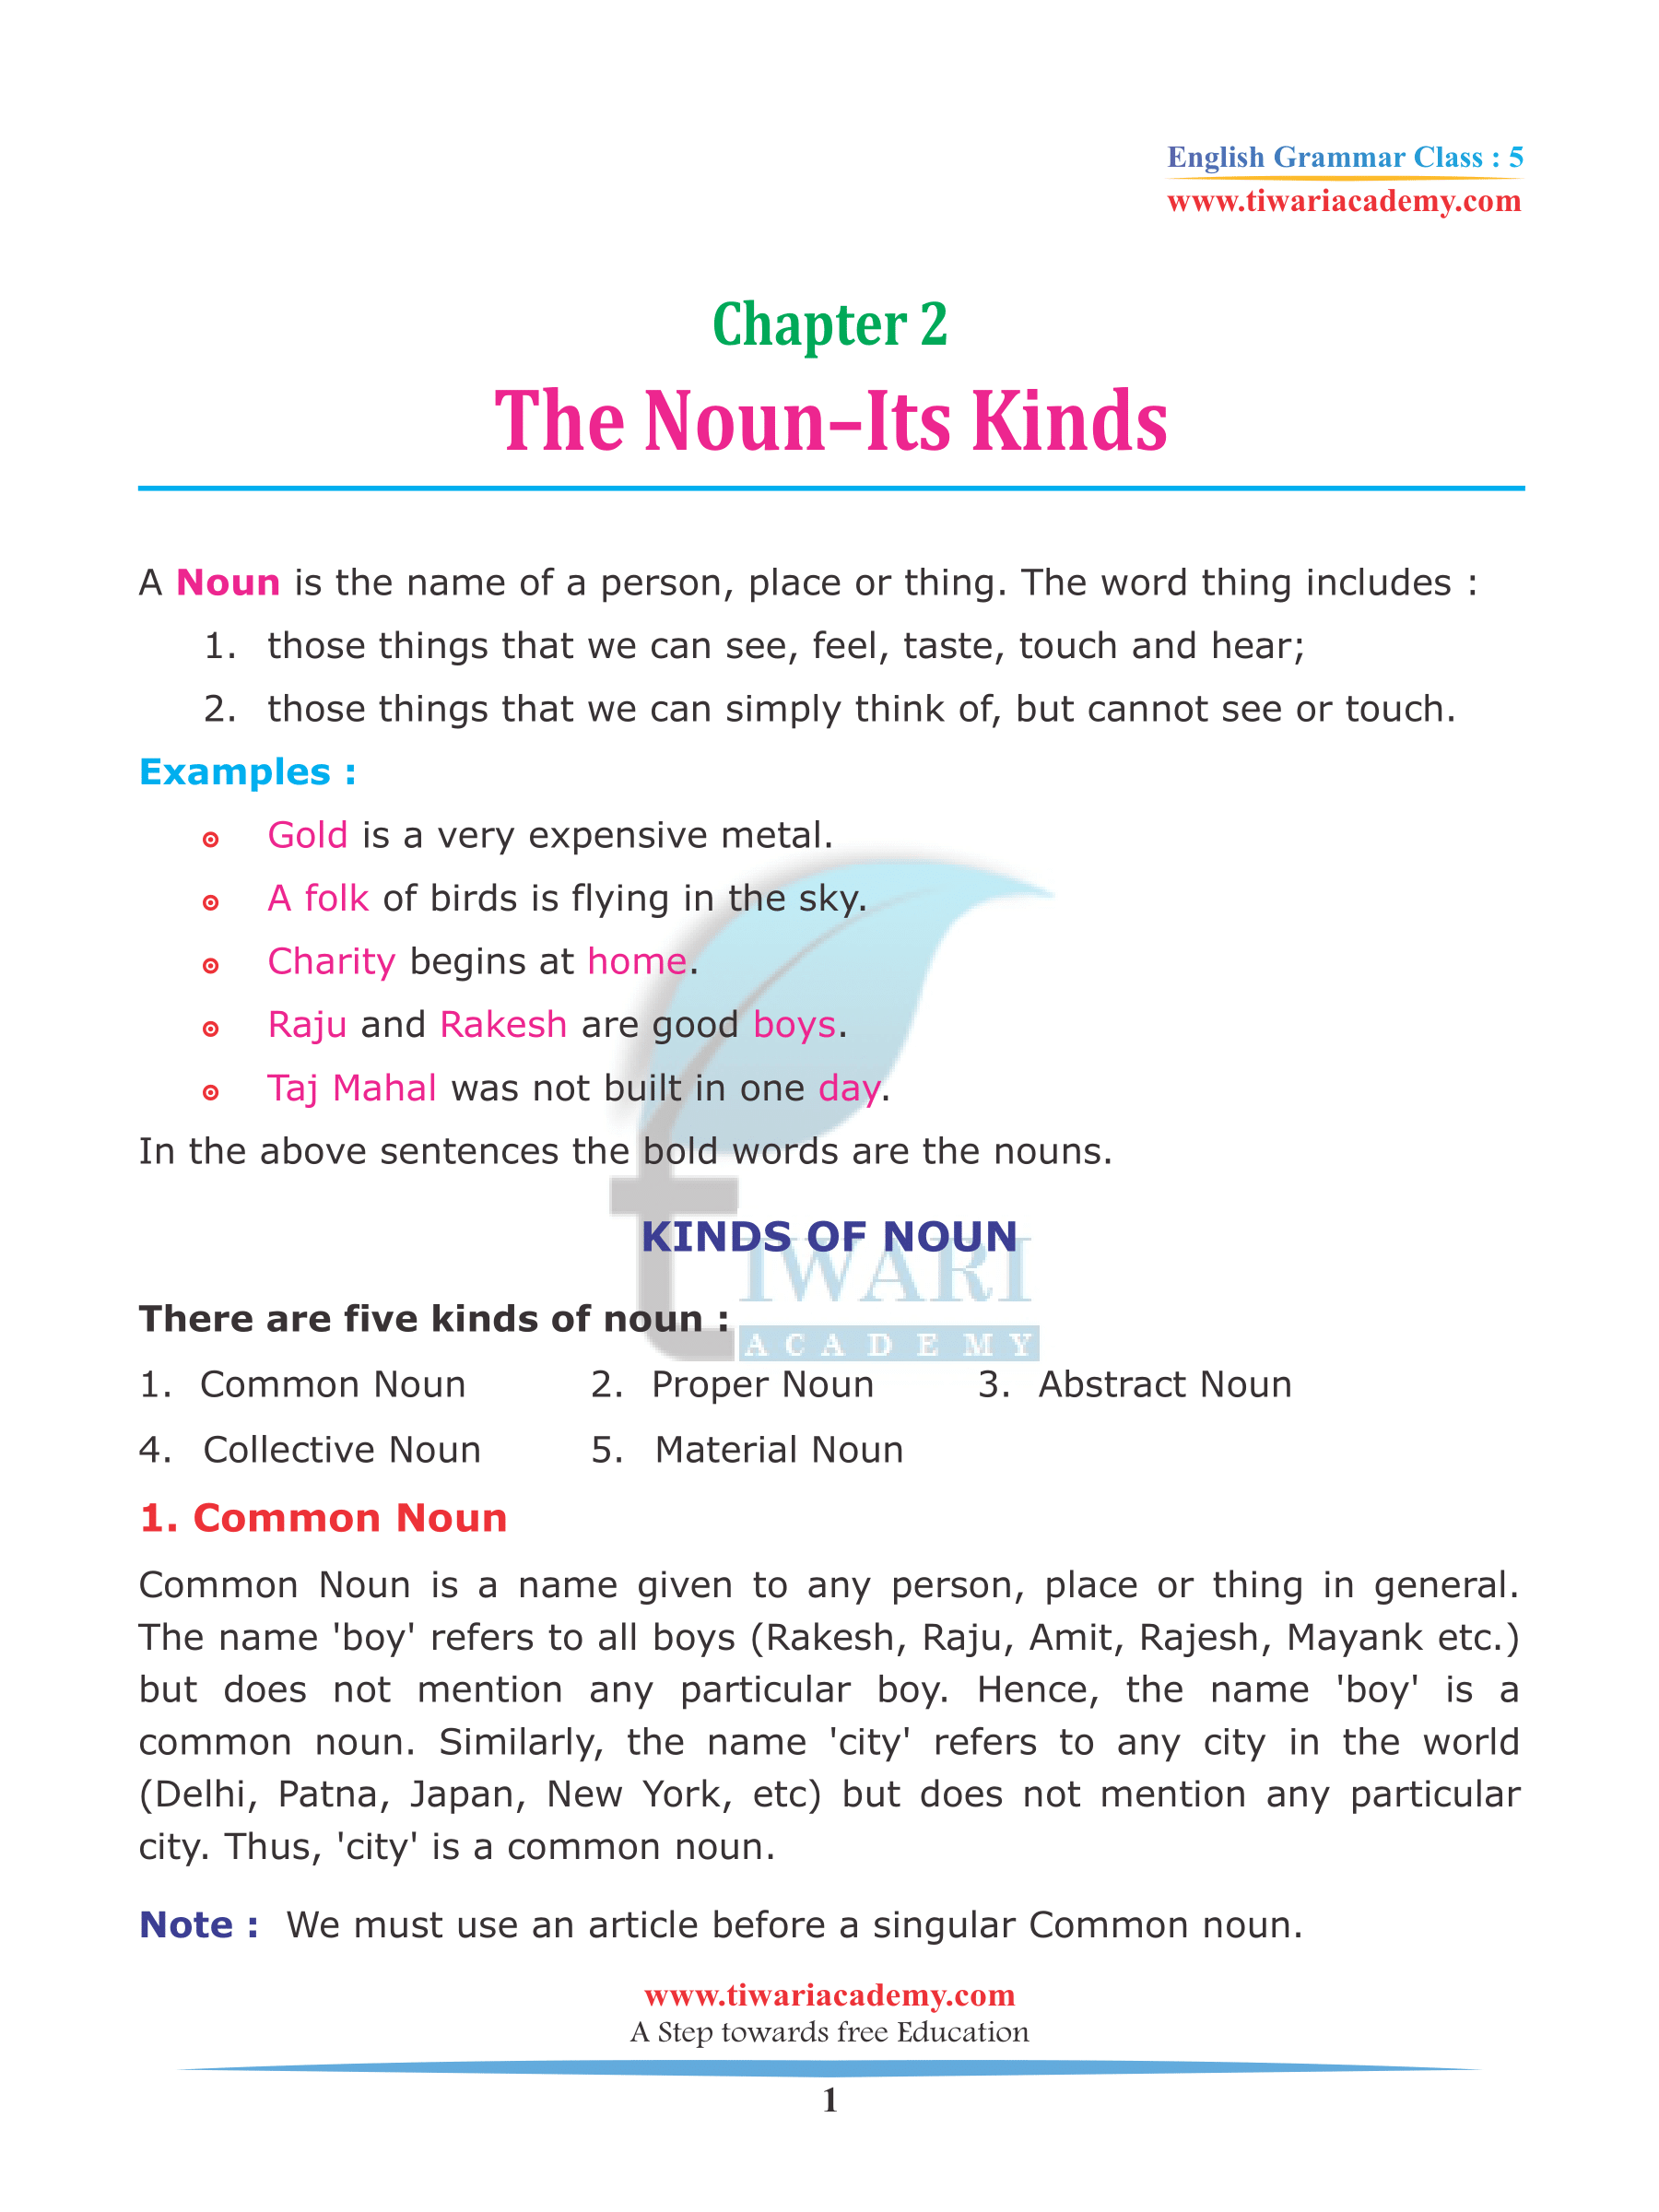 Class 5 English Grammar Chapter 2 The Noun and its Kinds